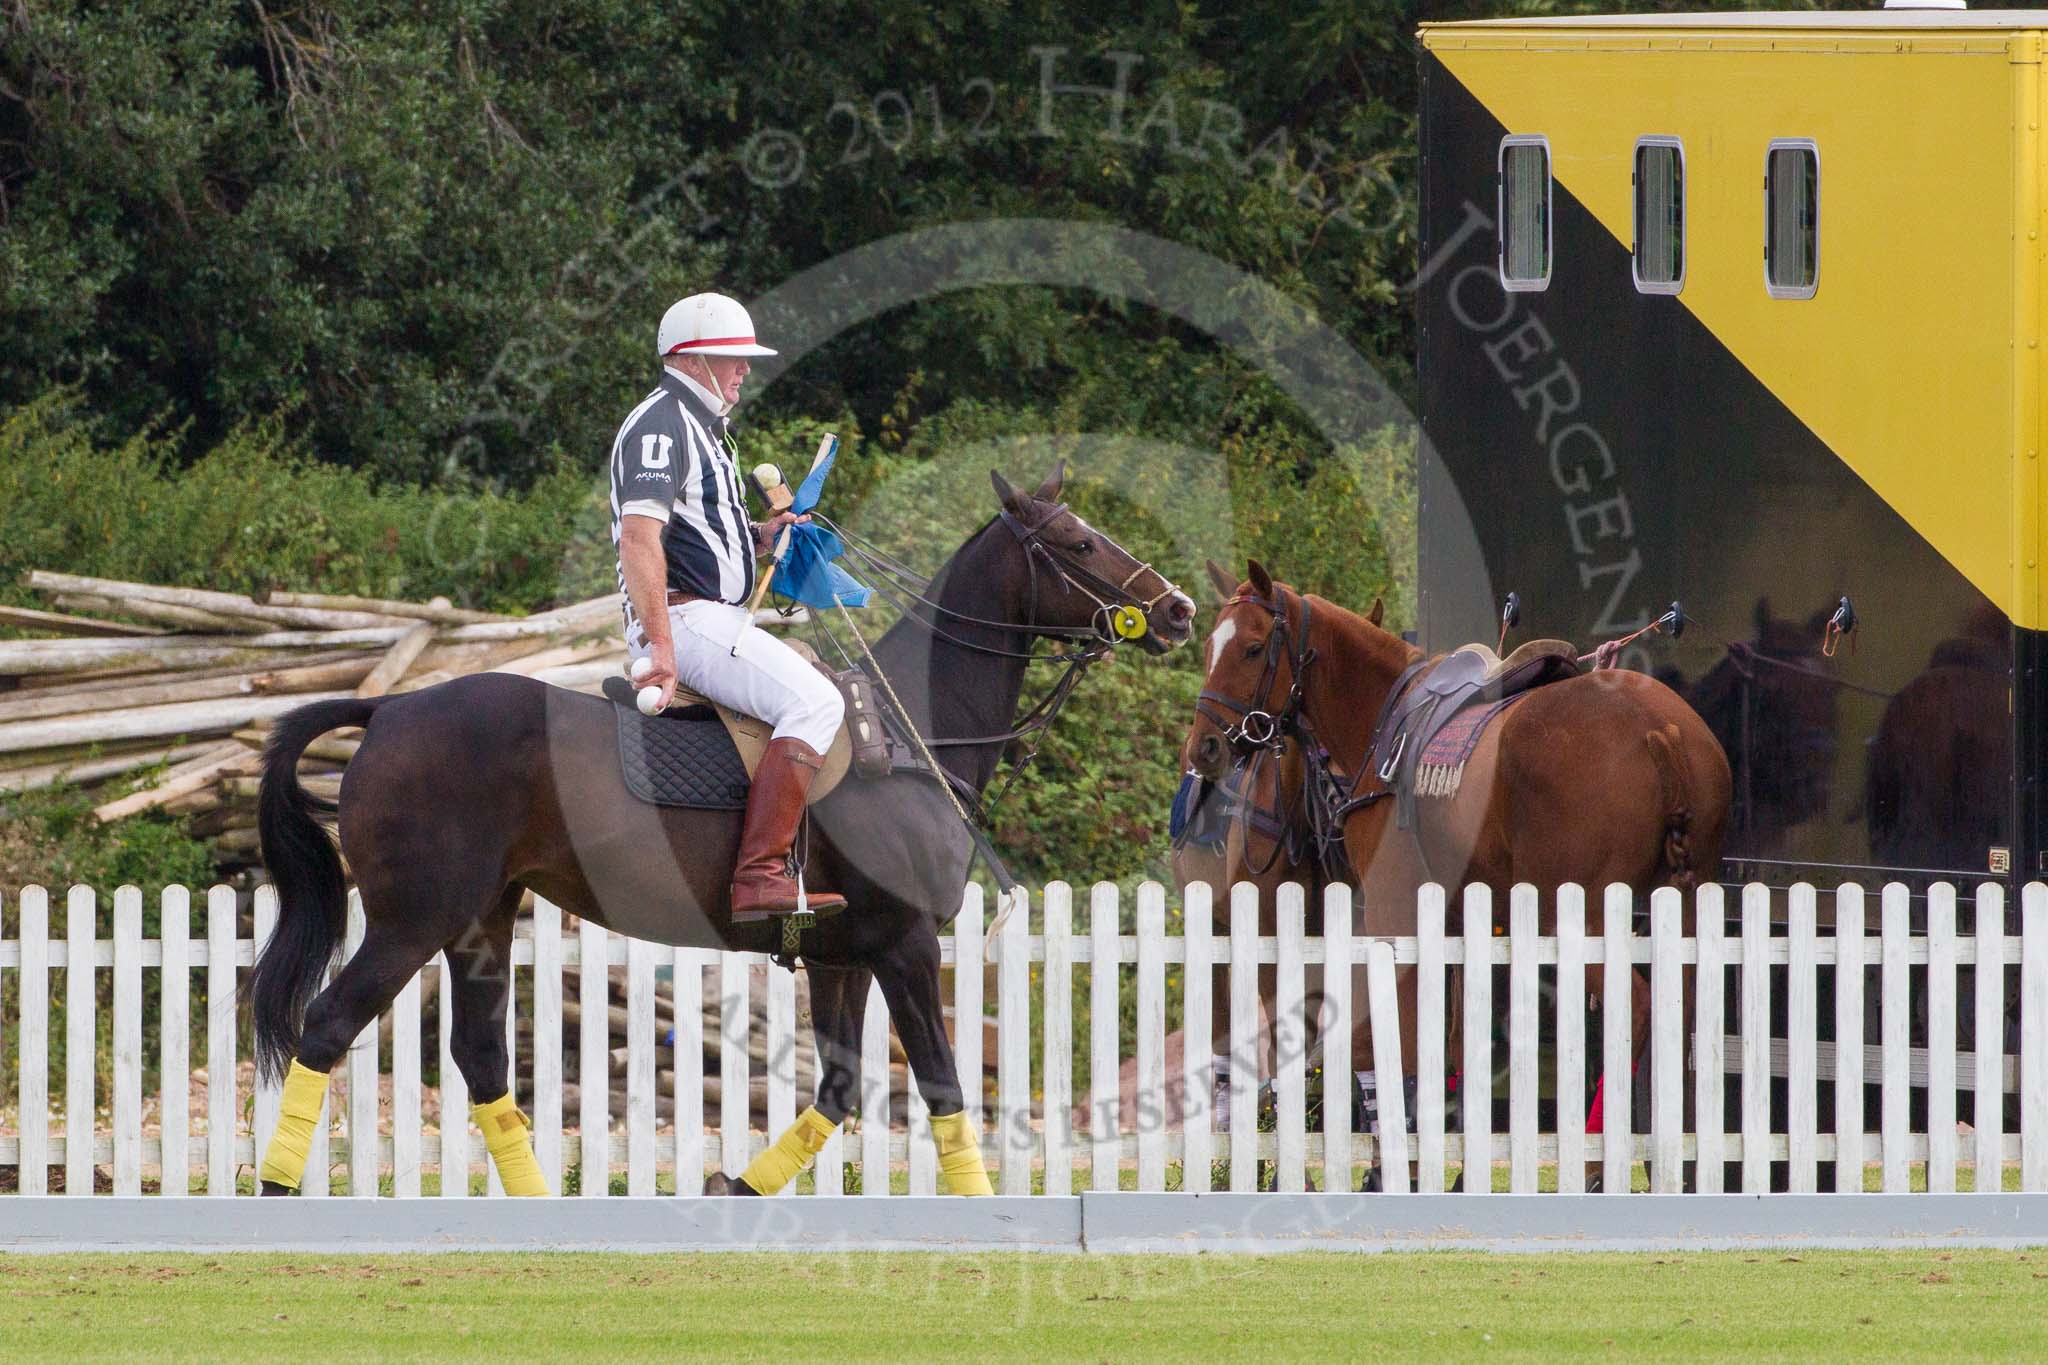 DBPC Polo in the Park 2012: The umpire and club polo manager Ian 'Ginger' Hunt, riding along the pony line with the blue goal flags..
Dallas Burston Polo Club,
Stoneythorpe Estate,
Southam,
Warwickshire,
United Kingdom,
on 16 September 2012 at 10:01, image #22